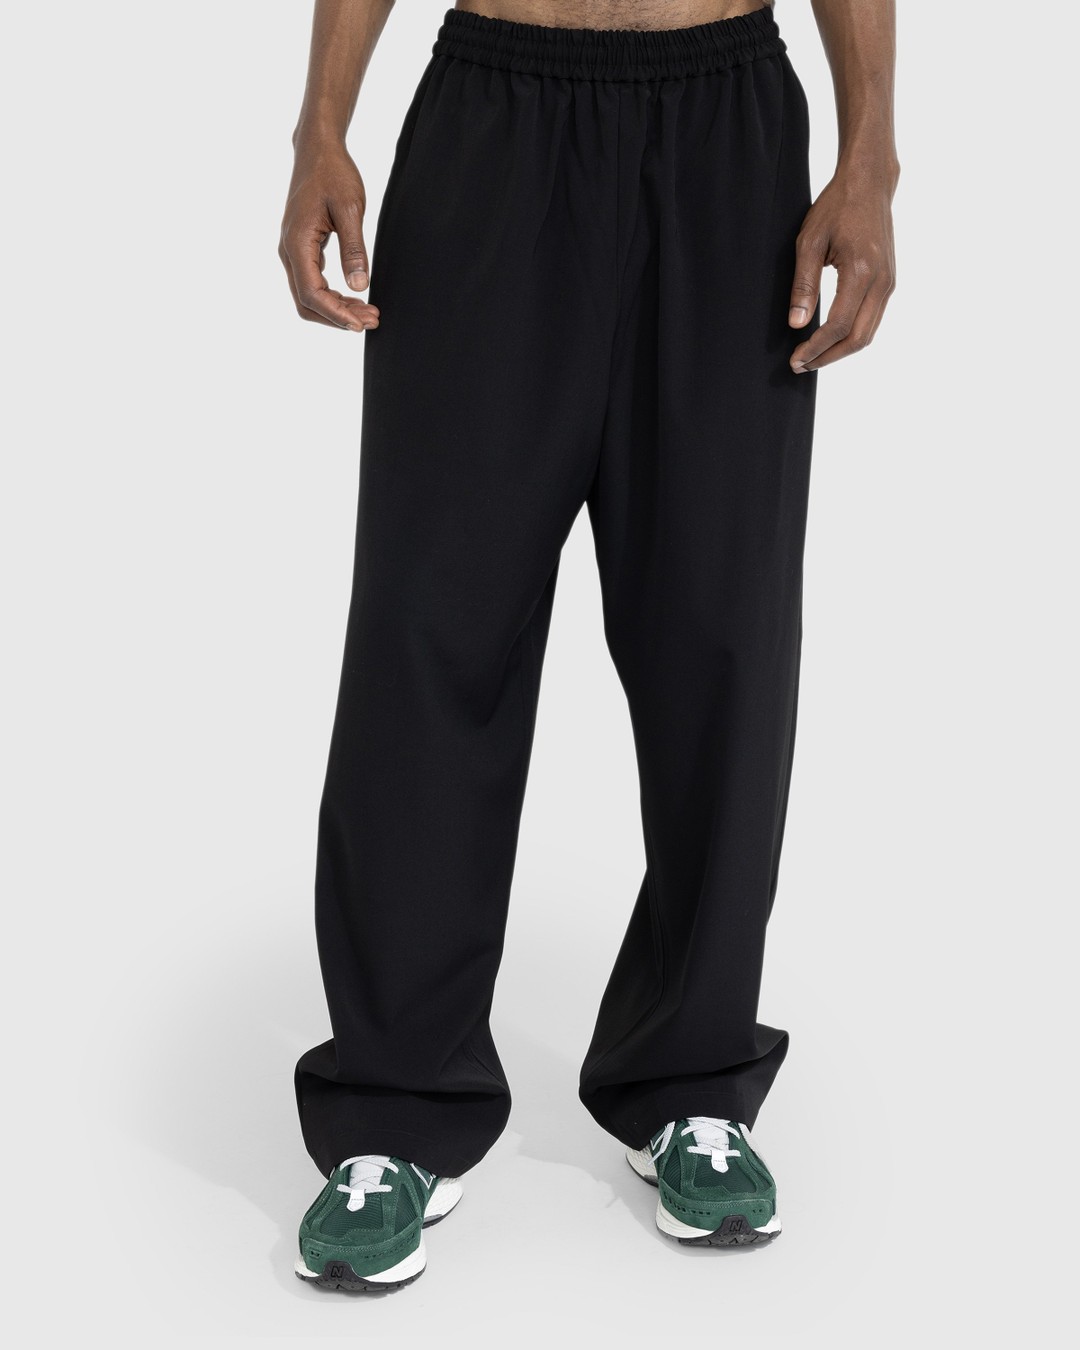 Acne Studios – Relaxed Fit Trousers Black - Pants - Black - Image 2